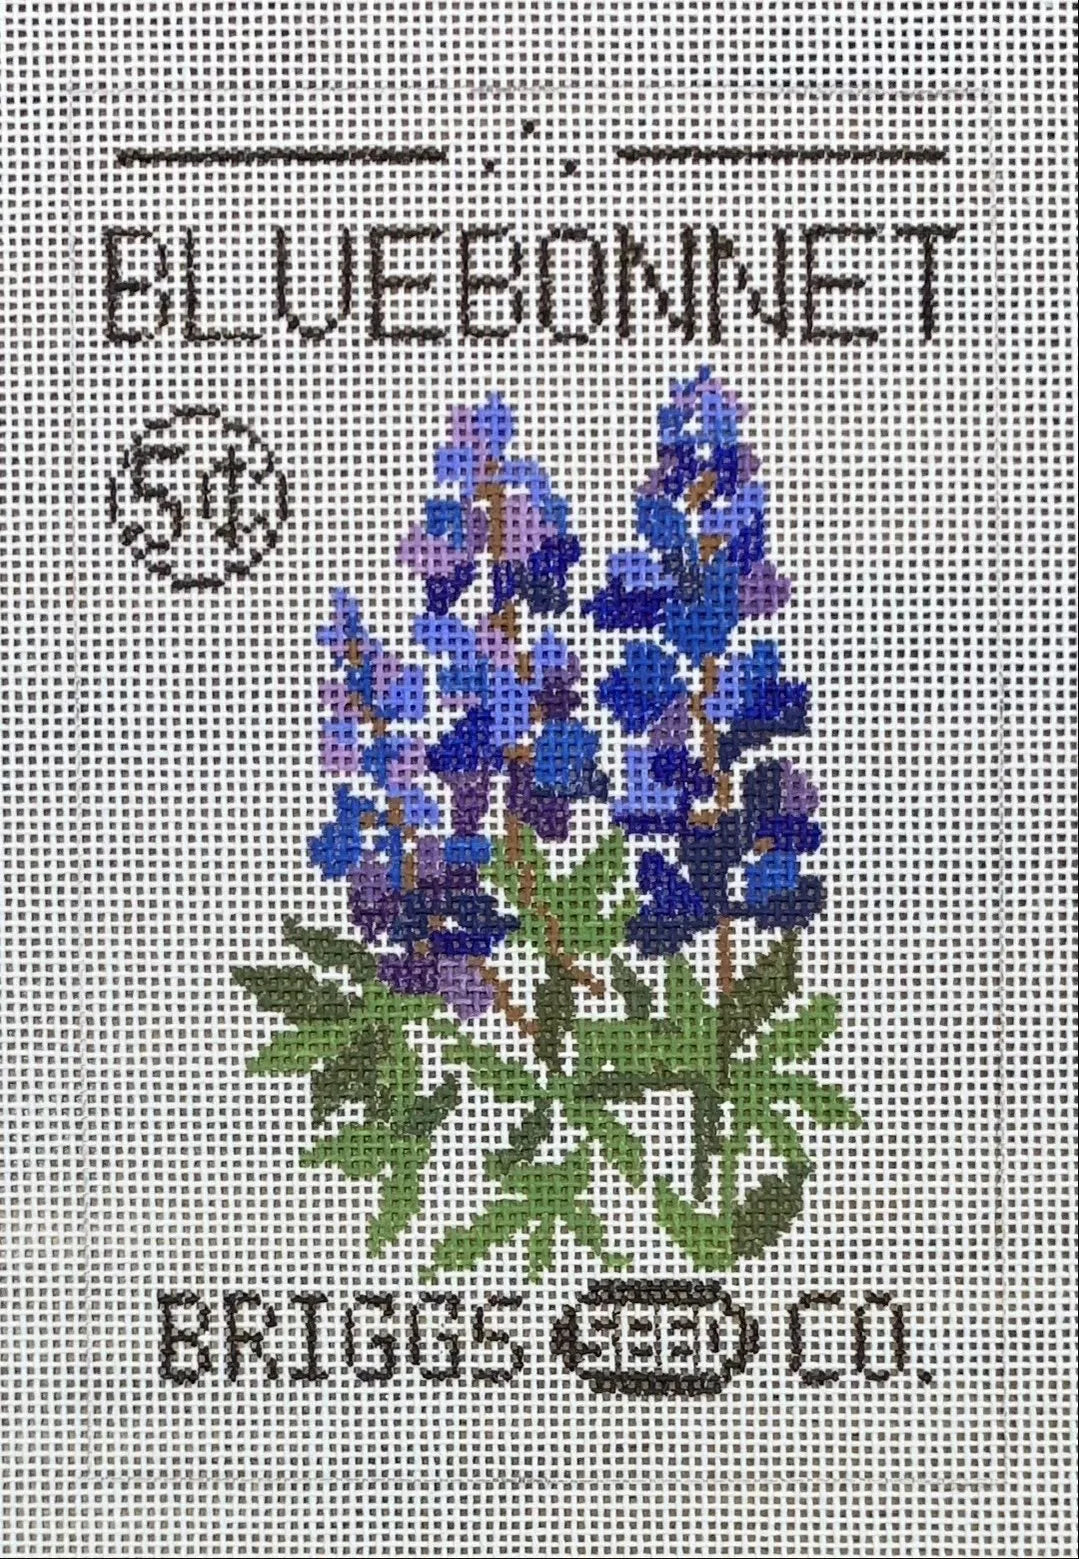 LL-SEED-08 Bluebonnet Seed Packet